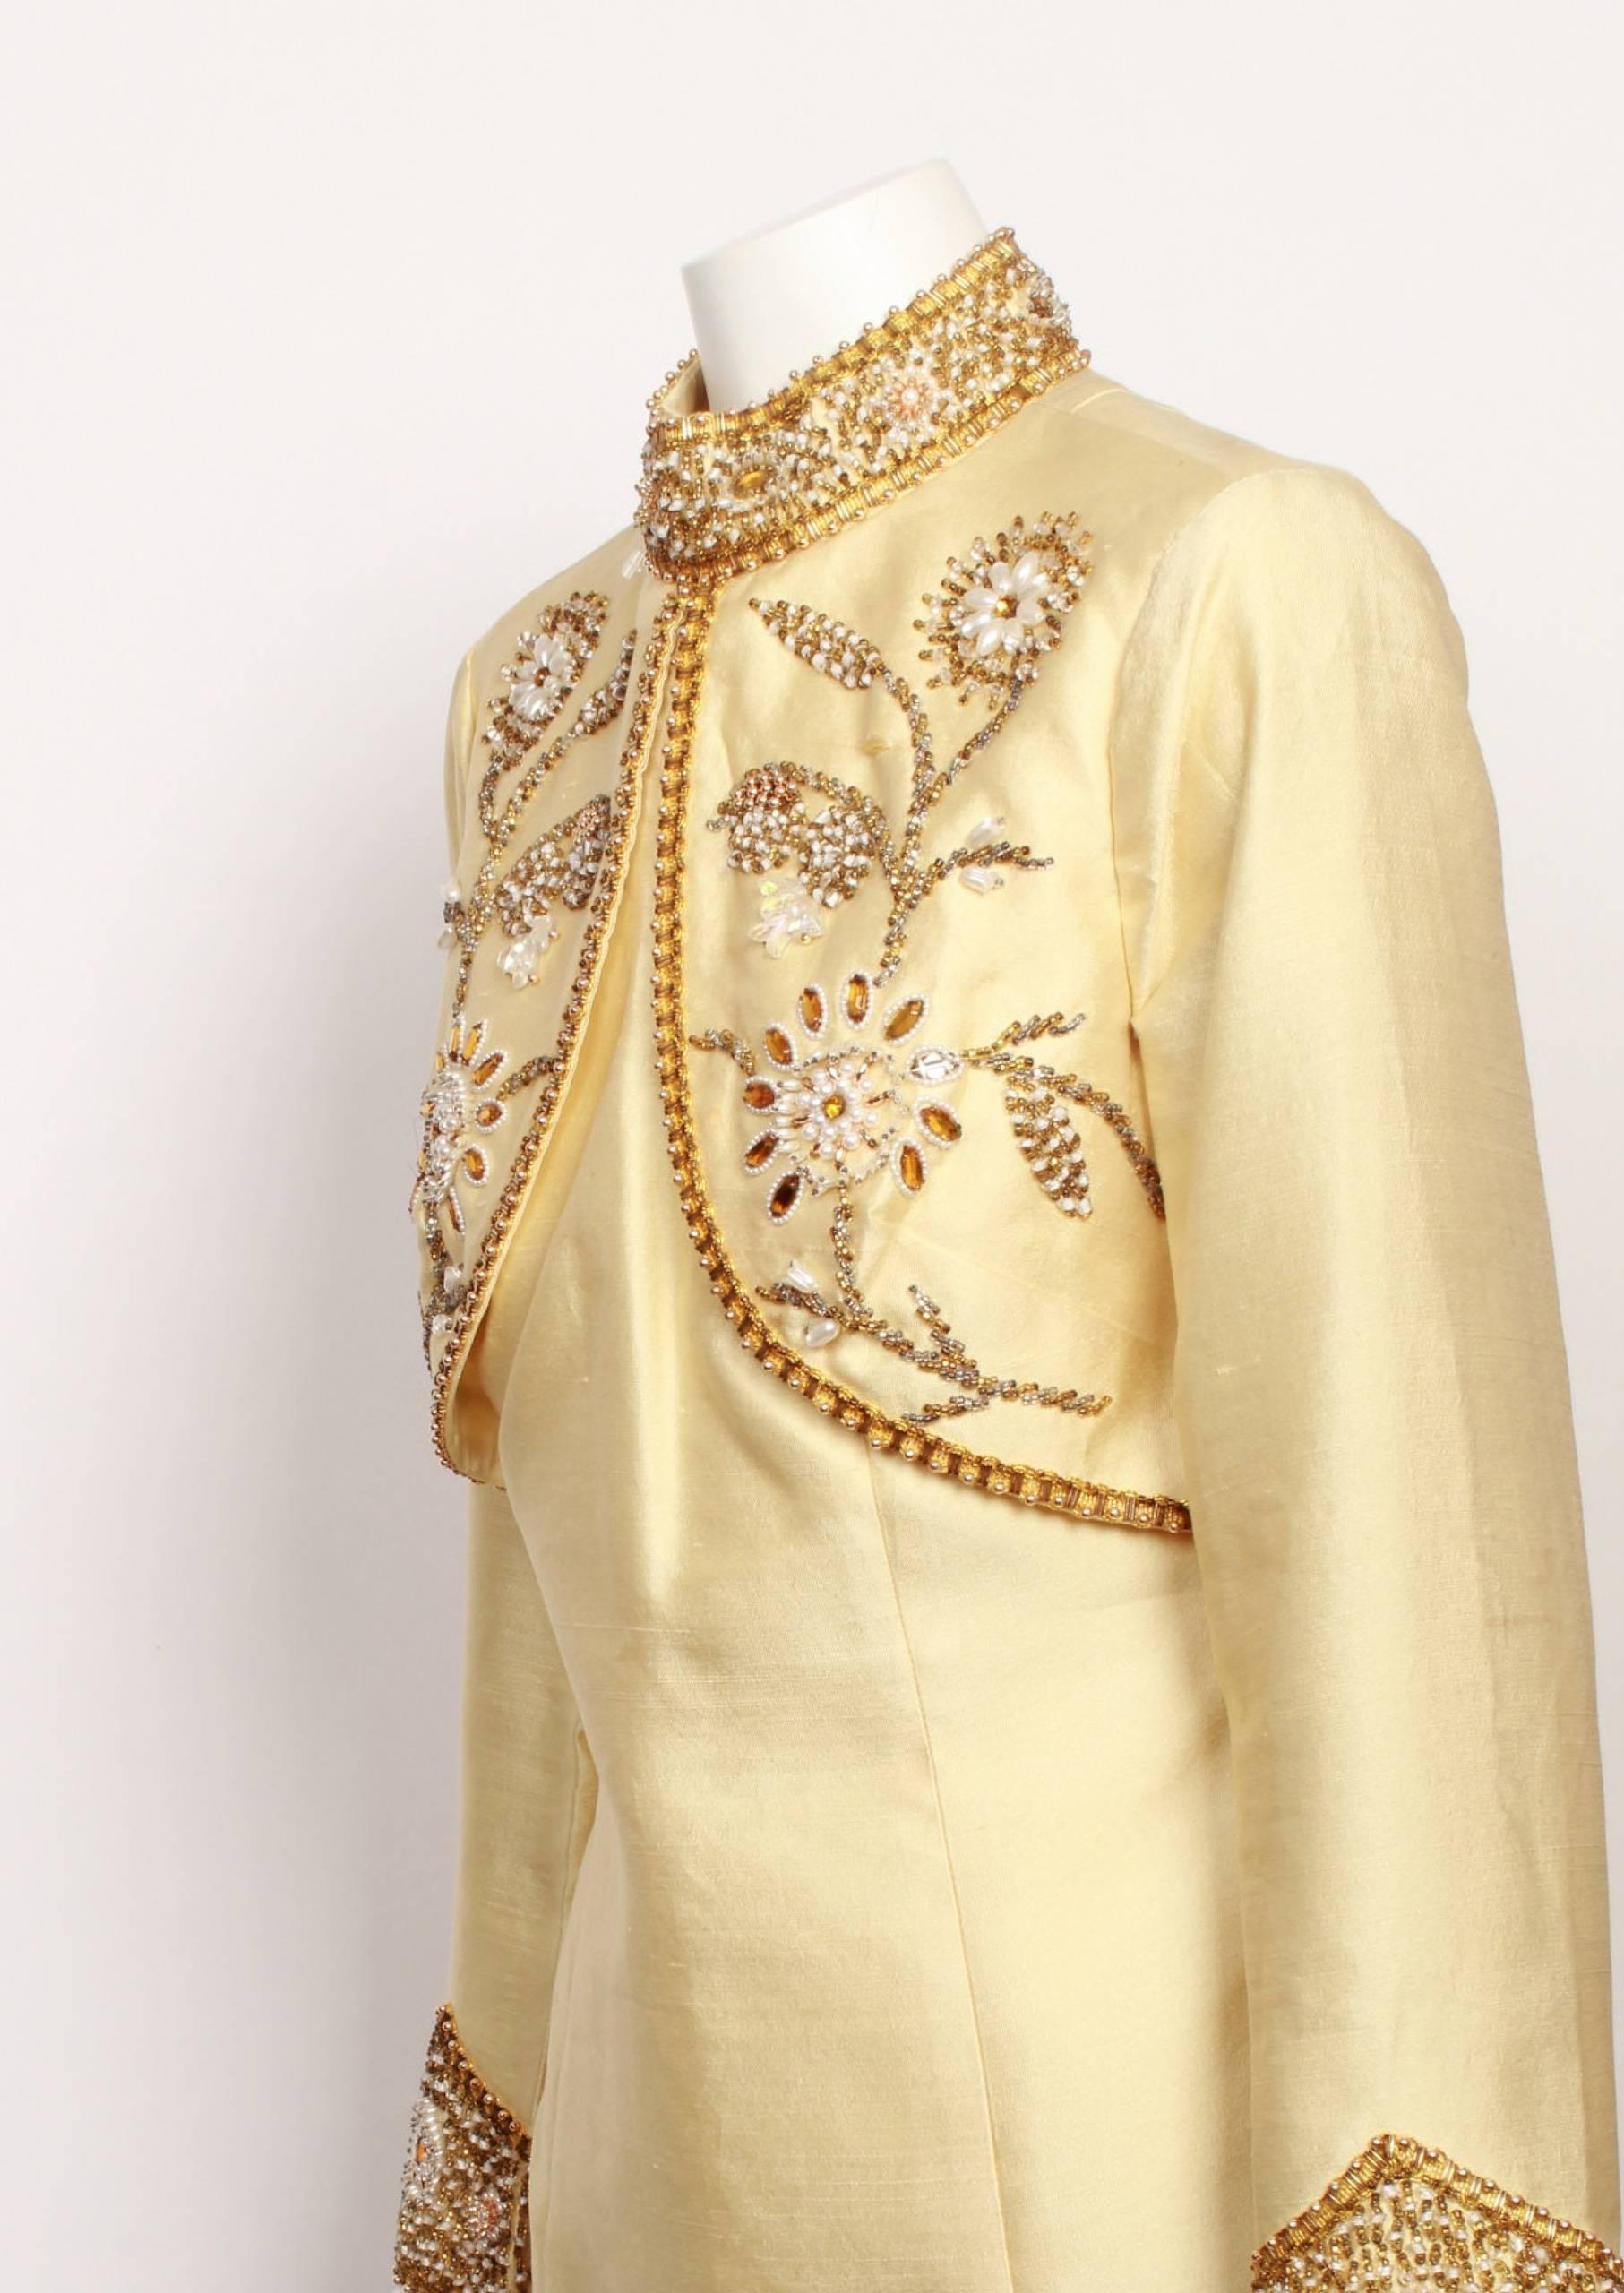 Stunning 1960's vintage jewel encrusted pale gold A-line mini dress made from 100% silk dupion. Beautiful floral hand beading in gold and white on bodice overlay and heavy encrusted beading on collar and sleeve hem. Back zipper closure and fully